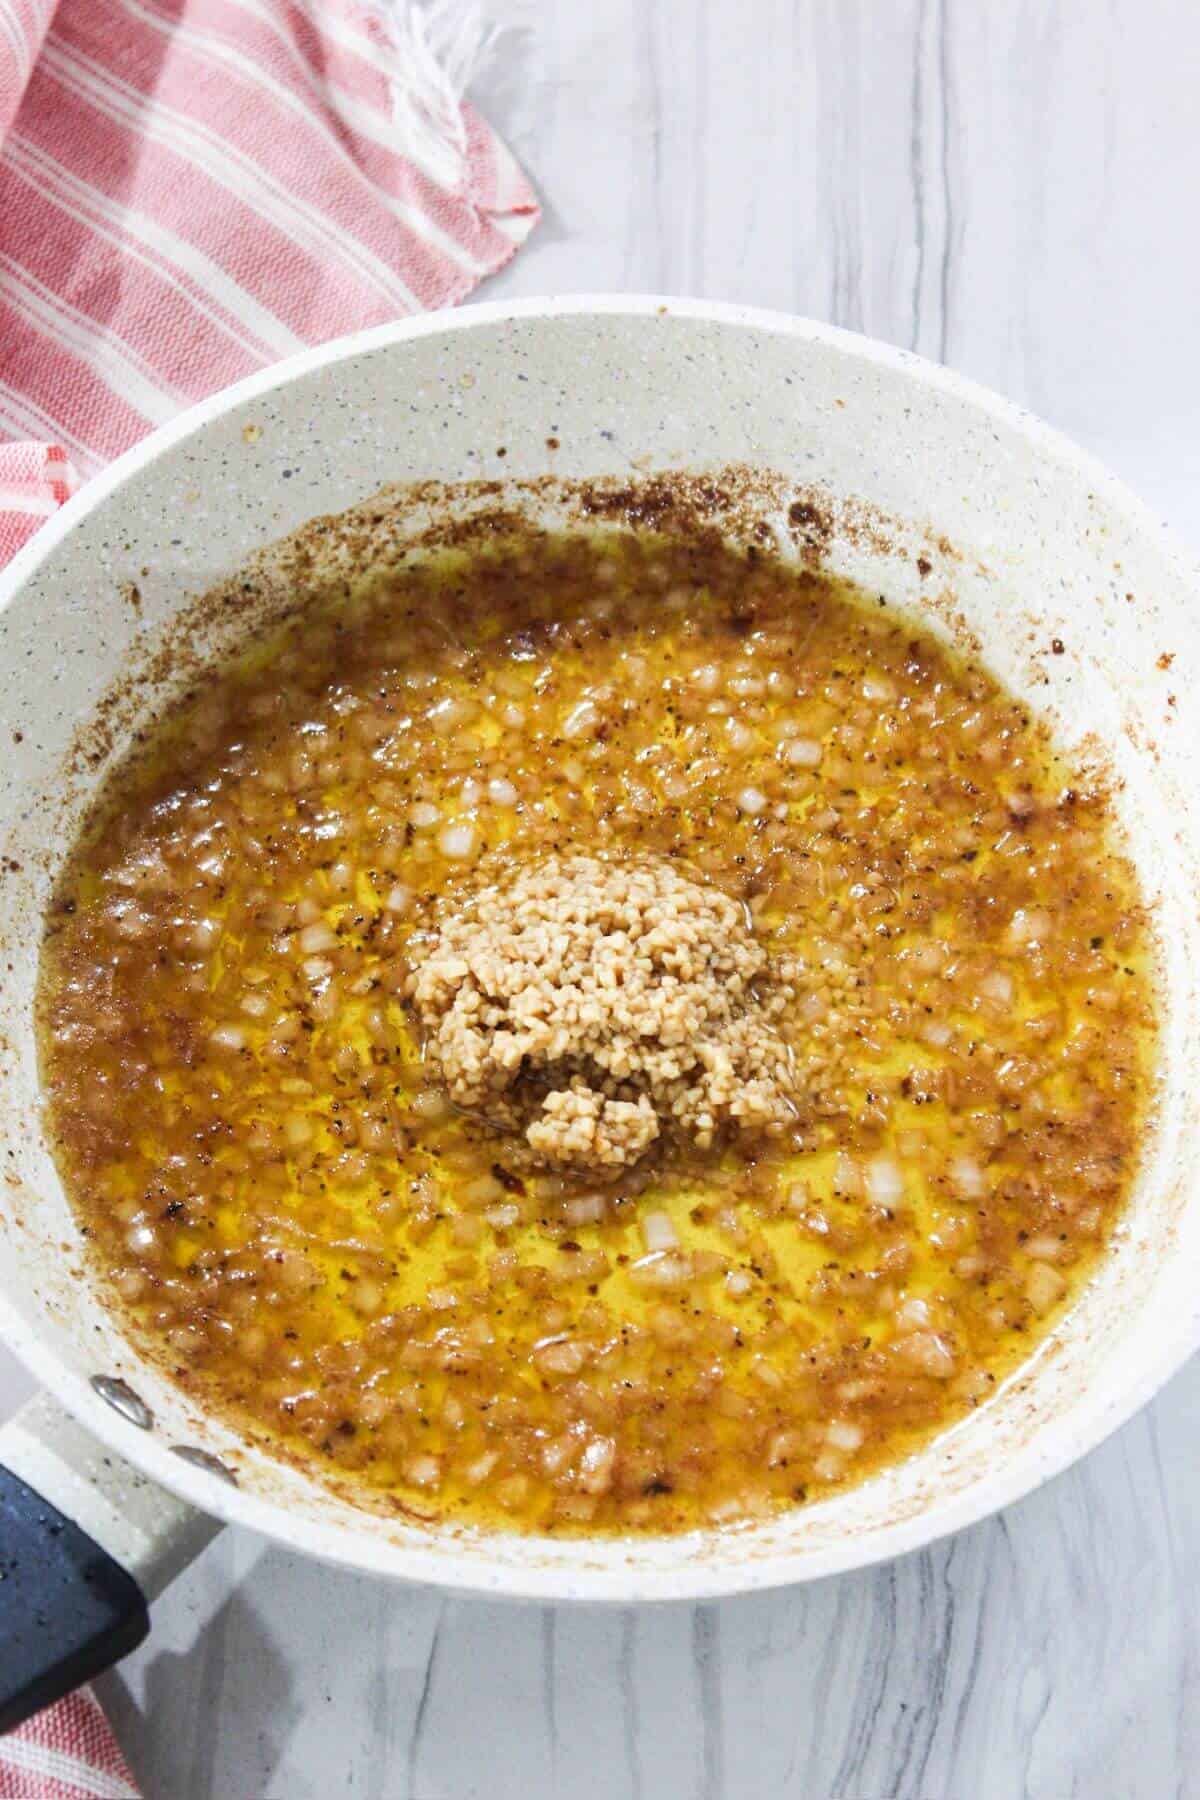 A frying pan with a mixture of brown sugar and cinnamon.